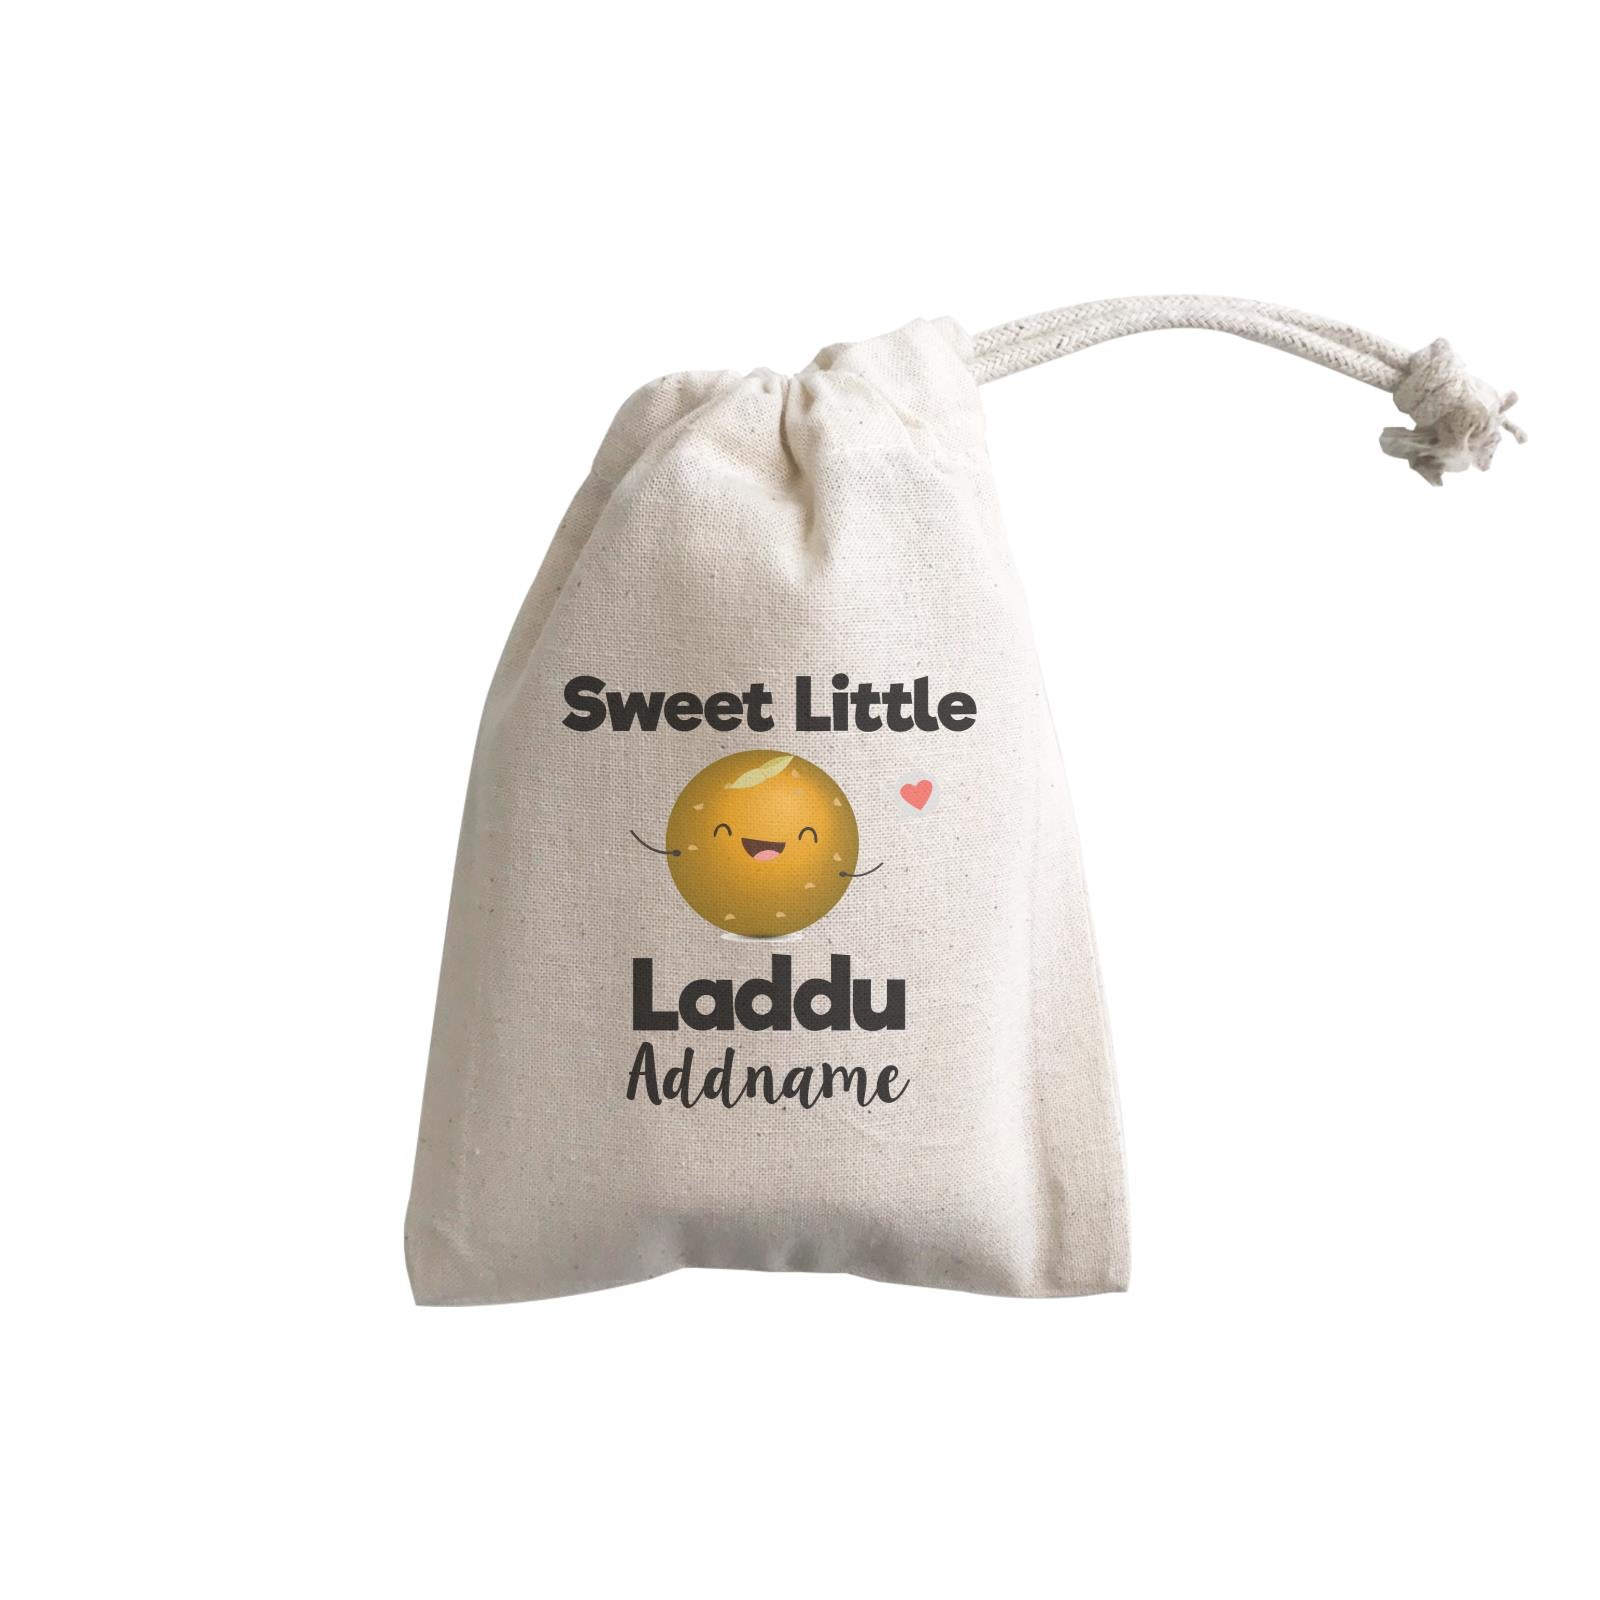 Sweet Little Laddu Addname GP Gift Pouch